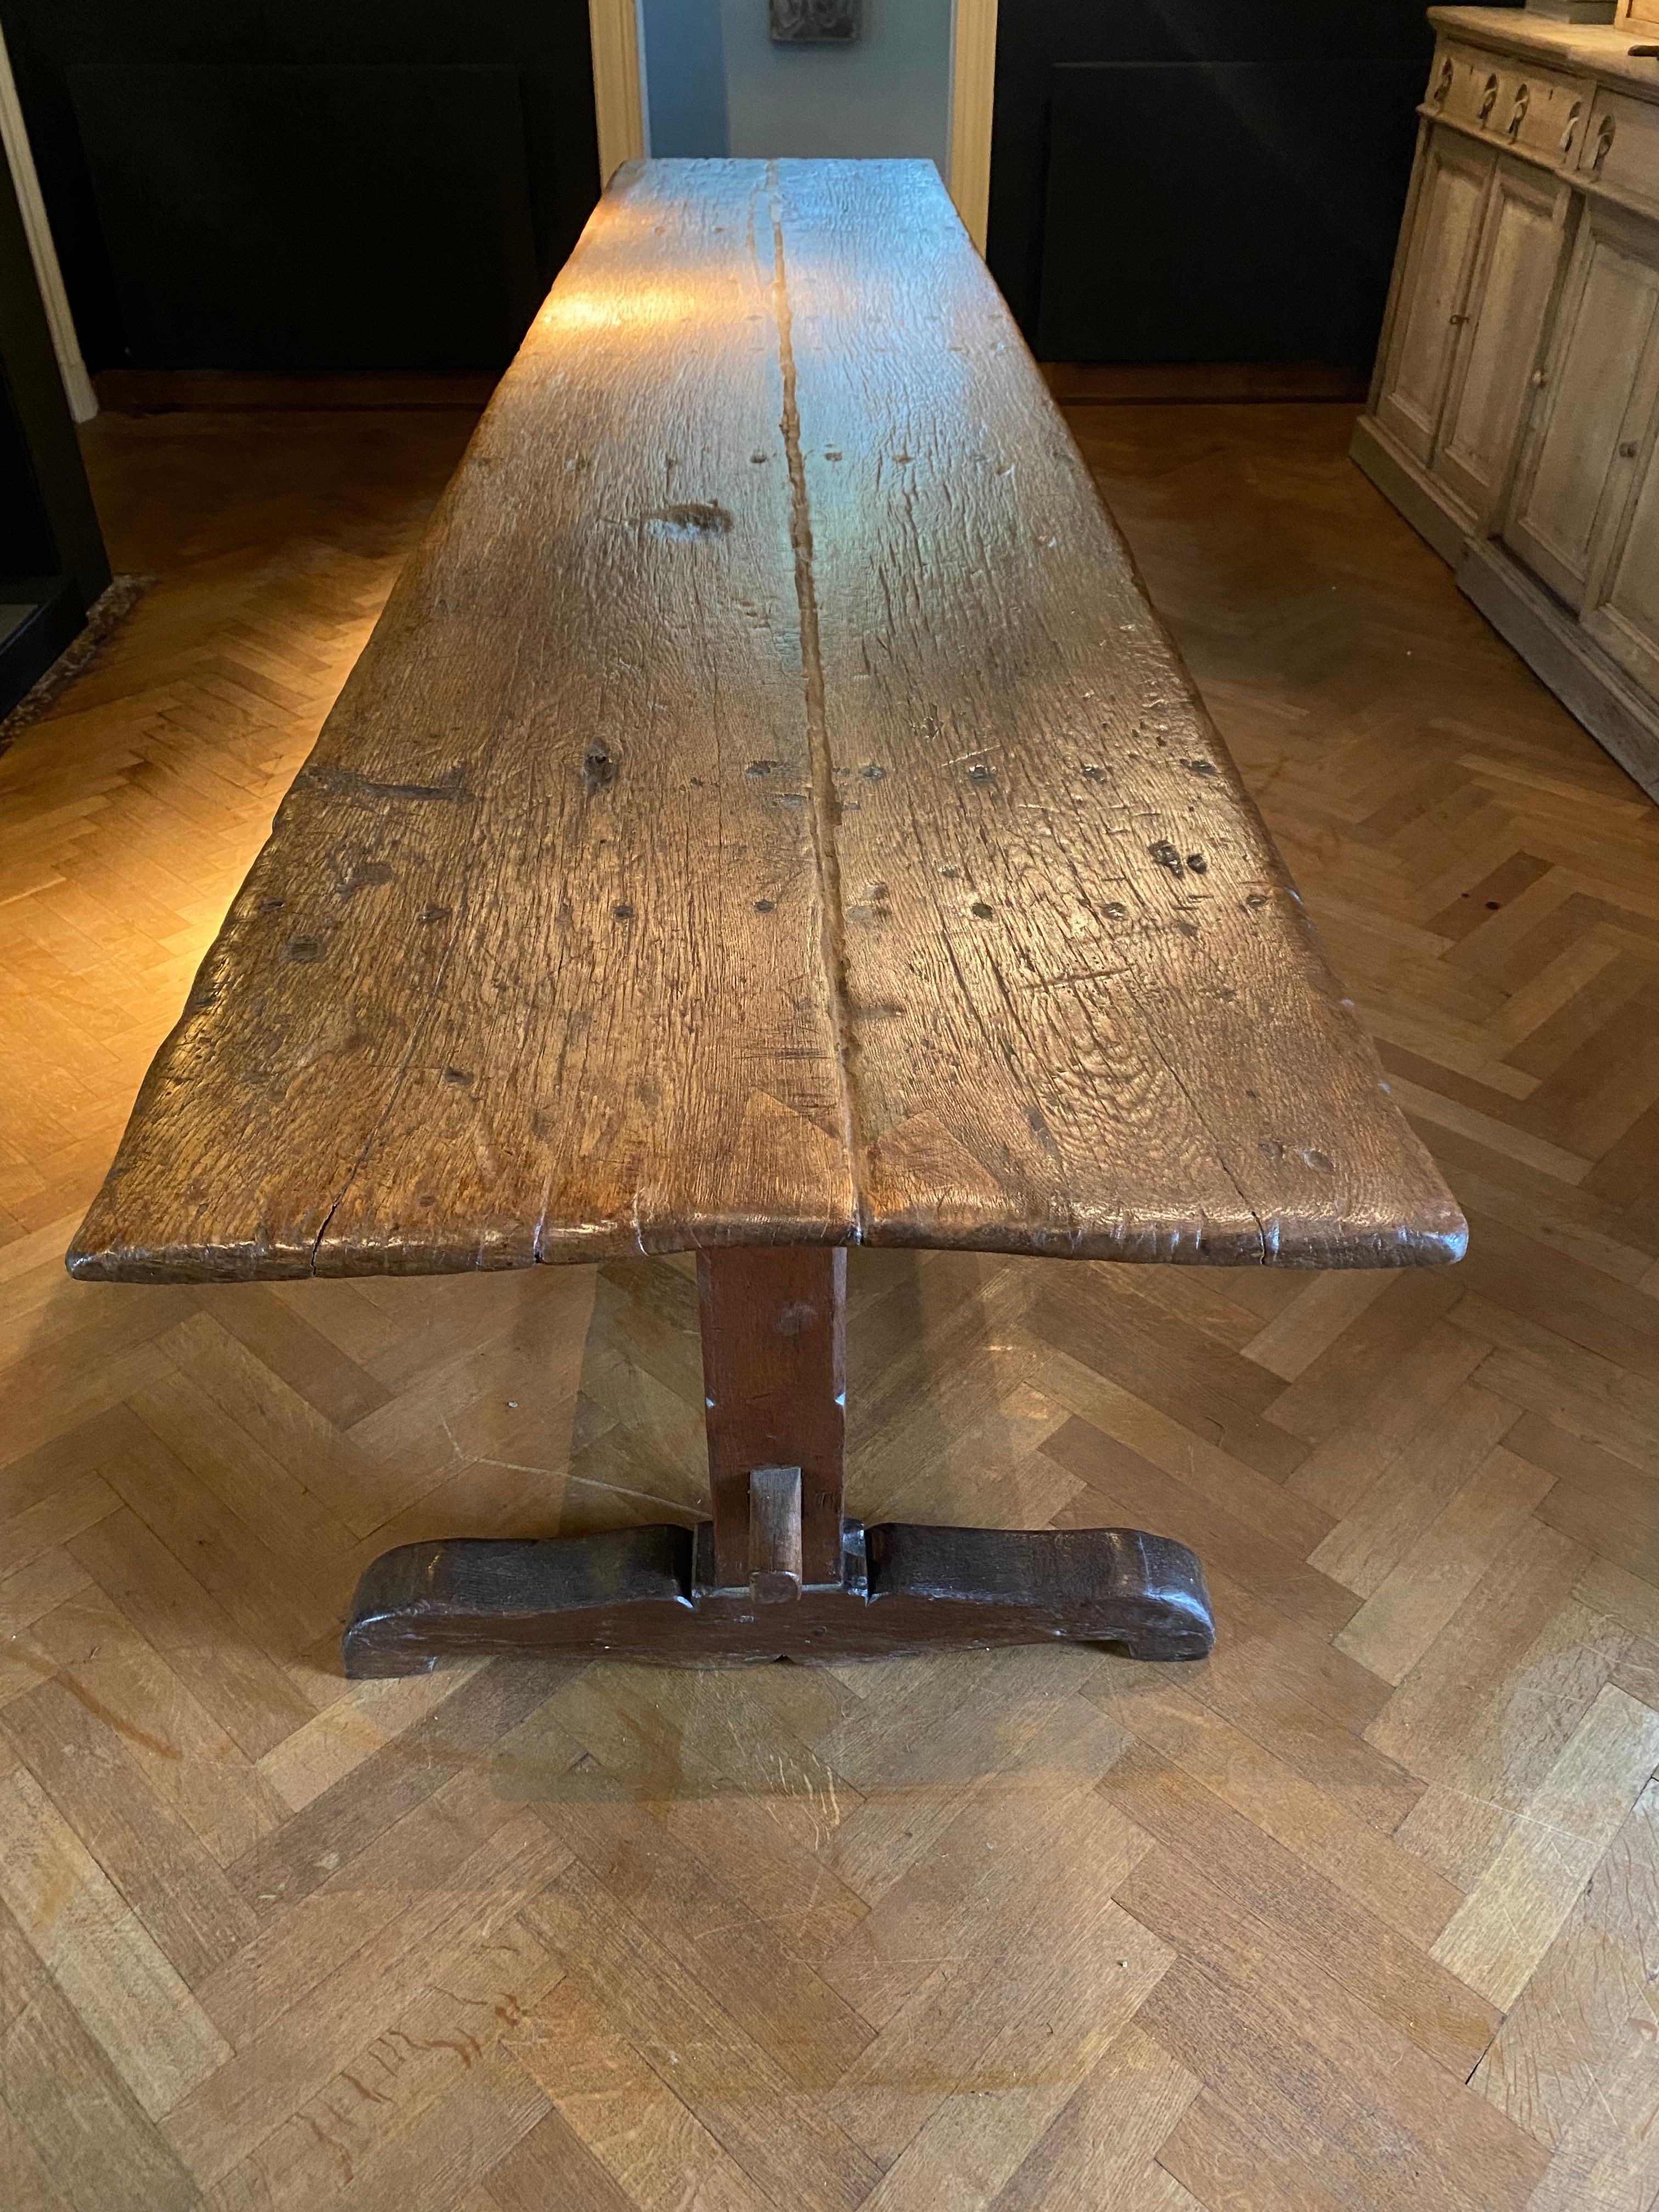 Exceptional Brutalist , Antique Convent Table from Italy,
Tuscany Region, Late 18 th Century,
the table has a beautiful old patina and shine of the Oak,
the 3 legs have a brown patina,
very elegant and decorative table,
can be used for different